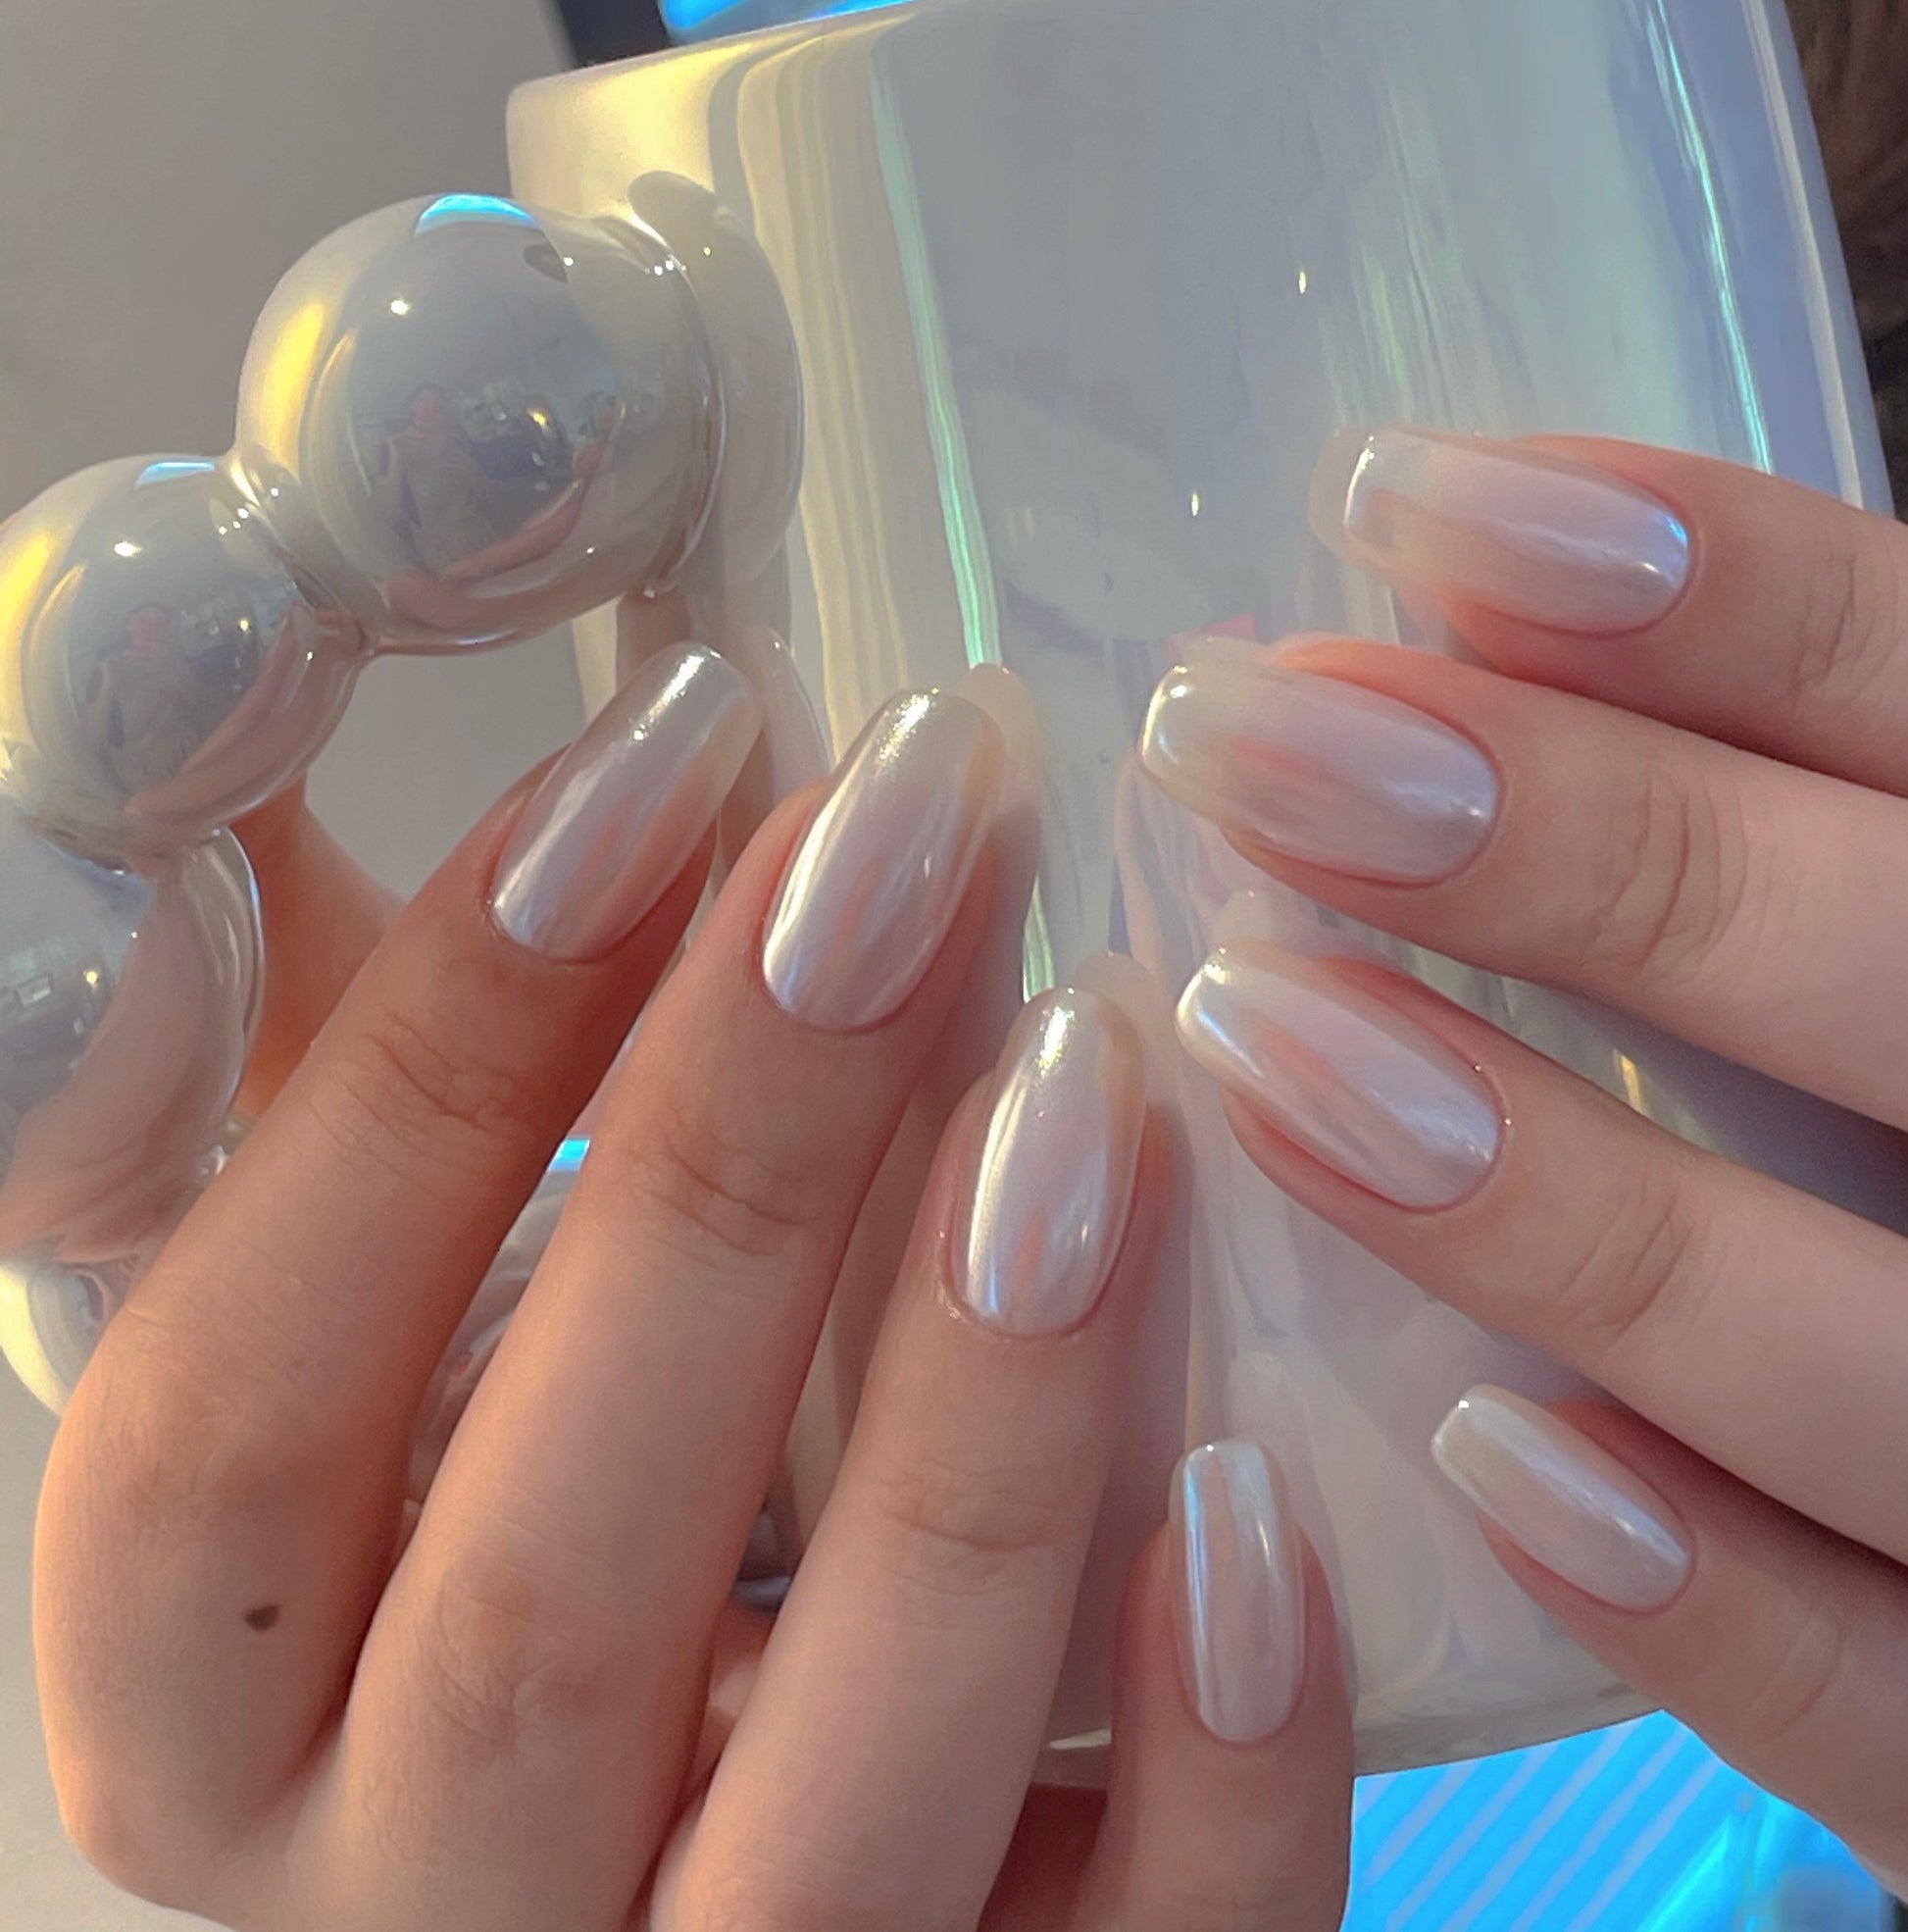 Pearl Nail Art Is The Chicest Trend You Will See Right Now